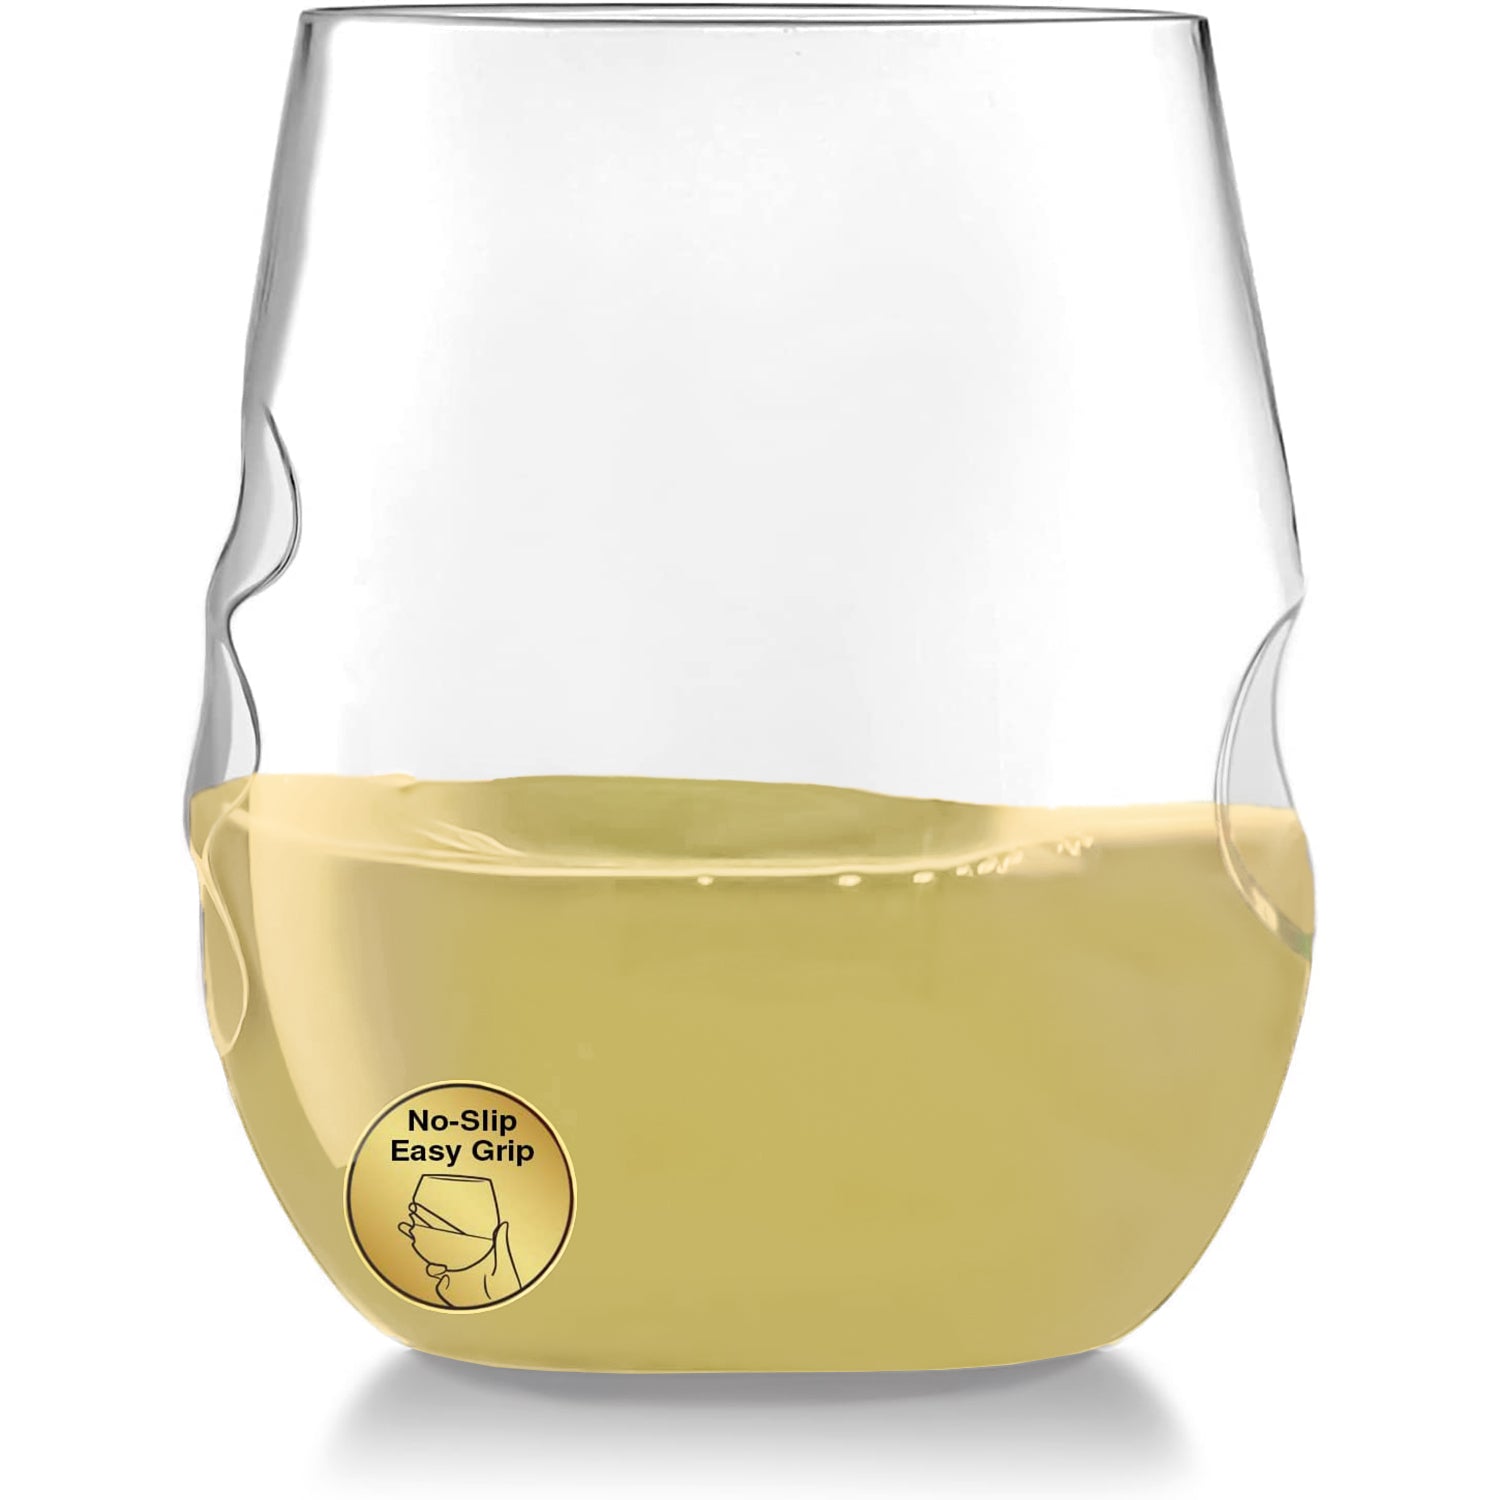 Plastic Stemless Champagne Wine Glasses, Disposable Wine Cups